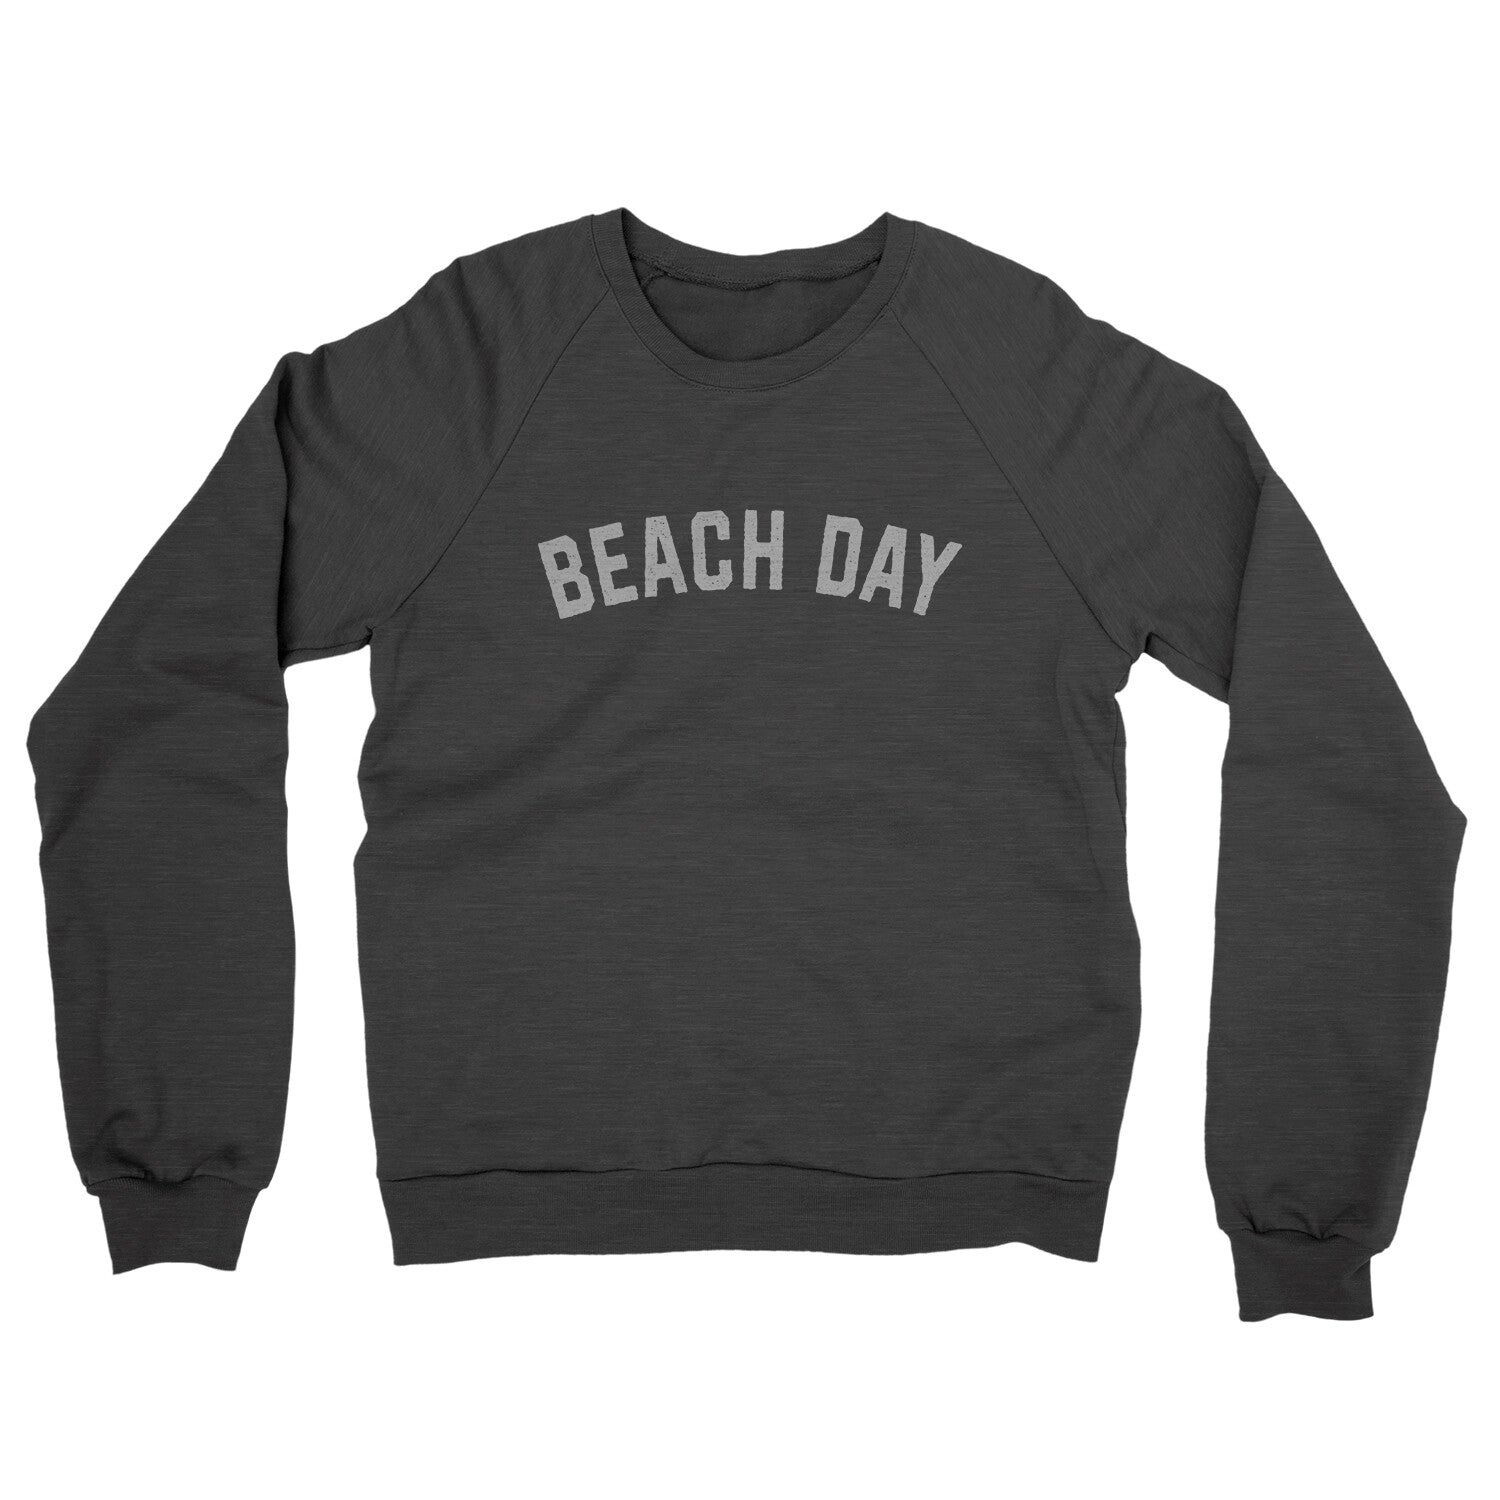 Beach Day in Charcoal Heather Color